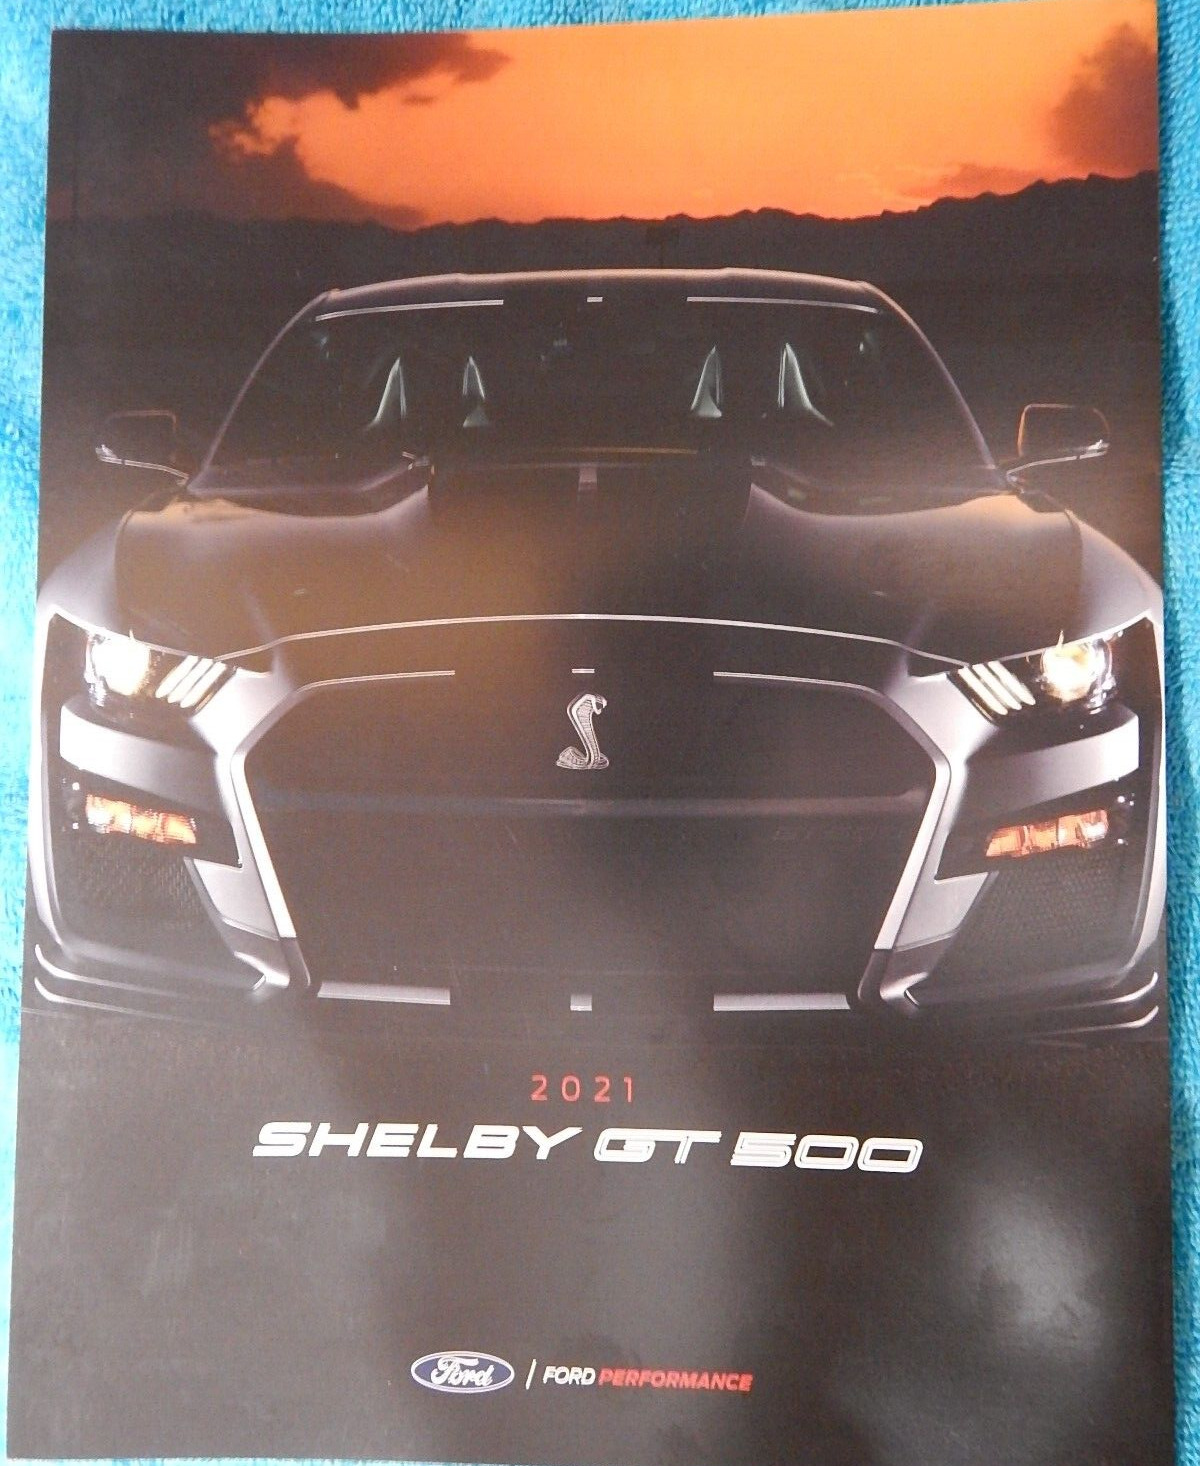 2021 Ford Mustang Shelby GT500 Dealer Sales Brochure New